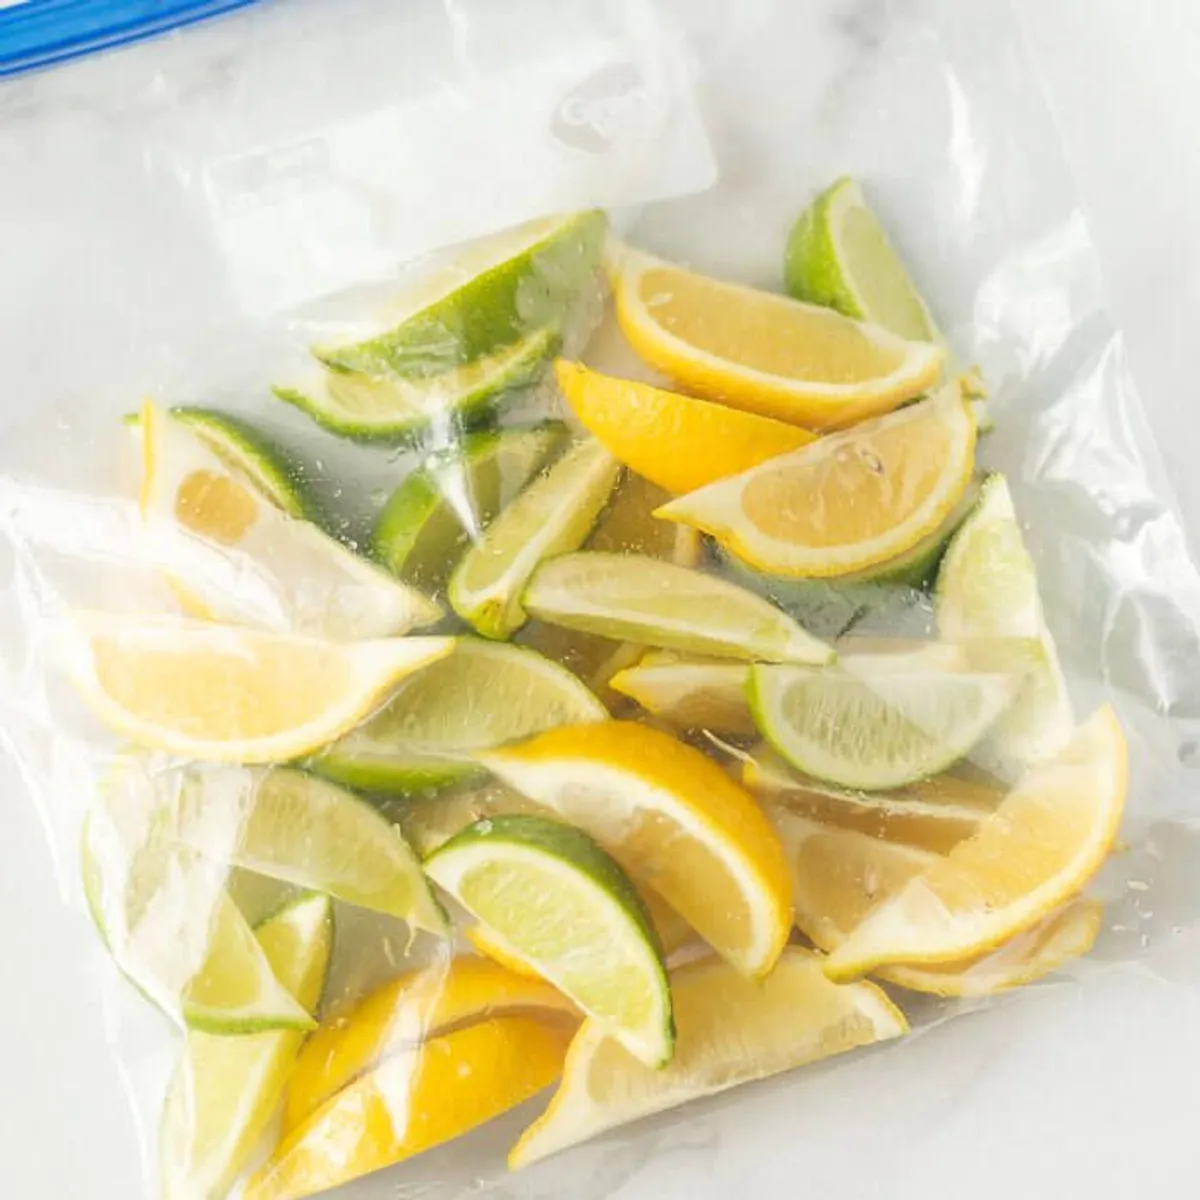 How to Store Lemons and Limes in a freeze